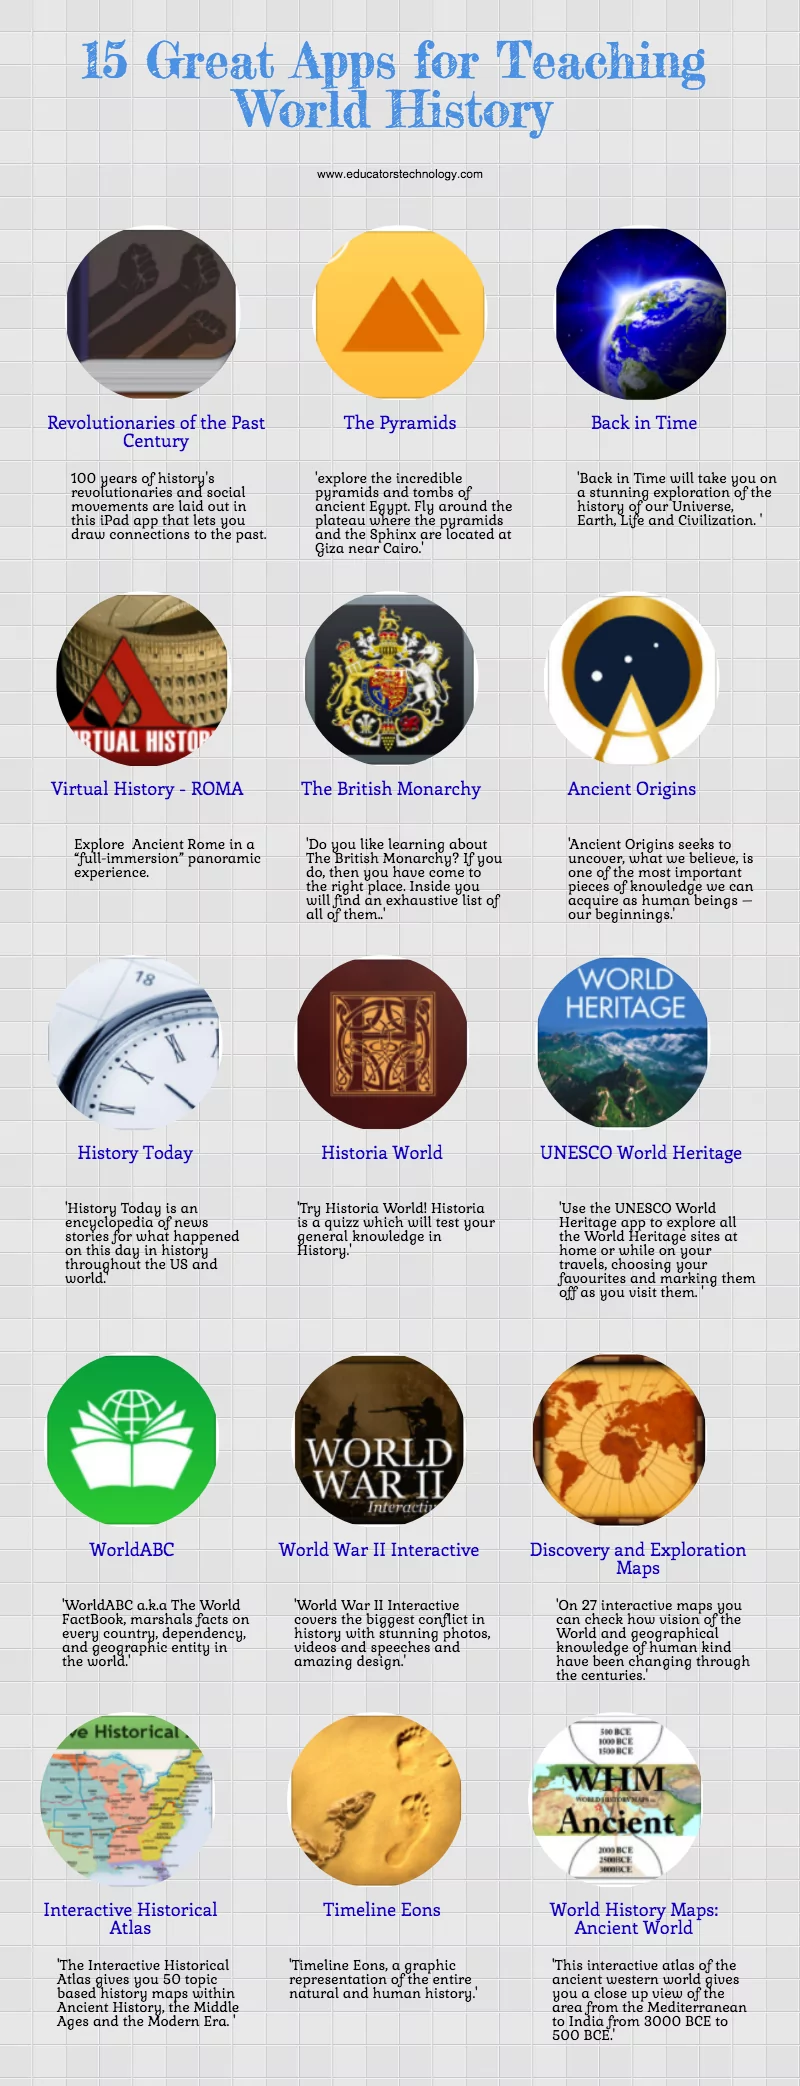 15 Great Apps for Teaching World History